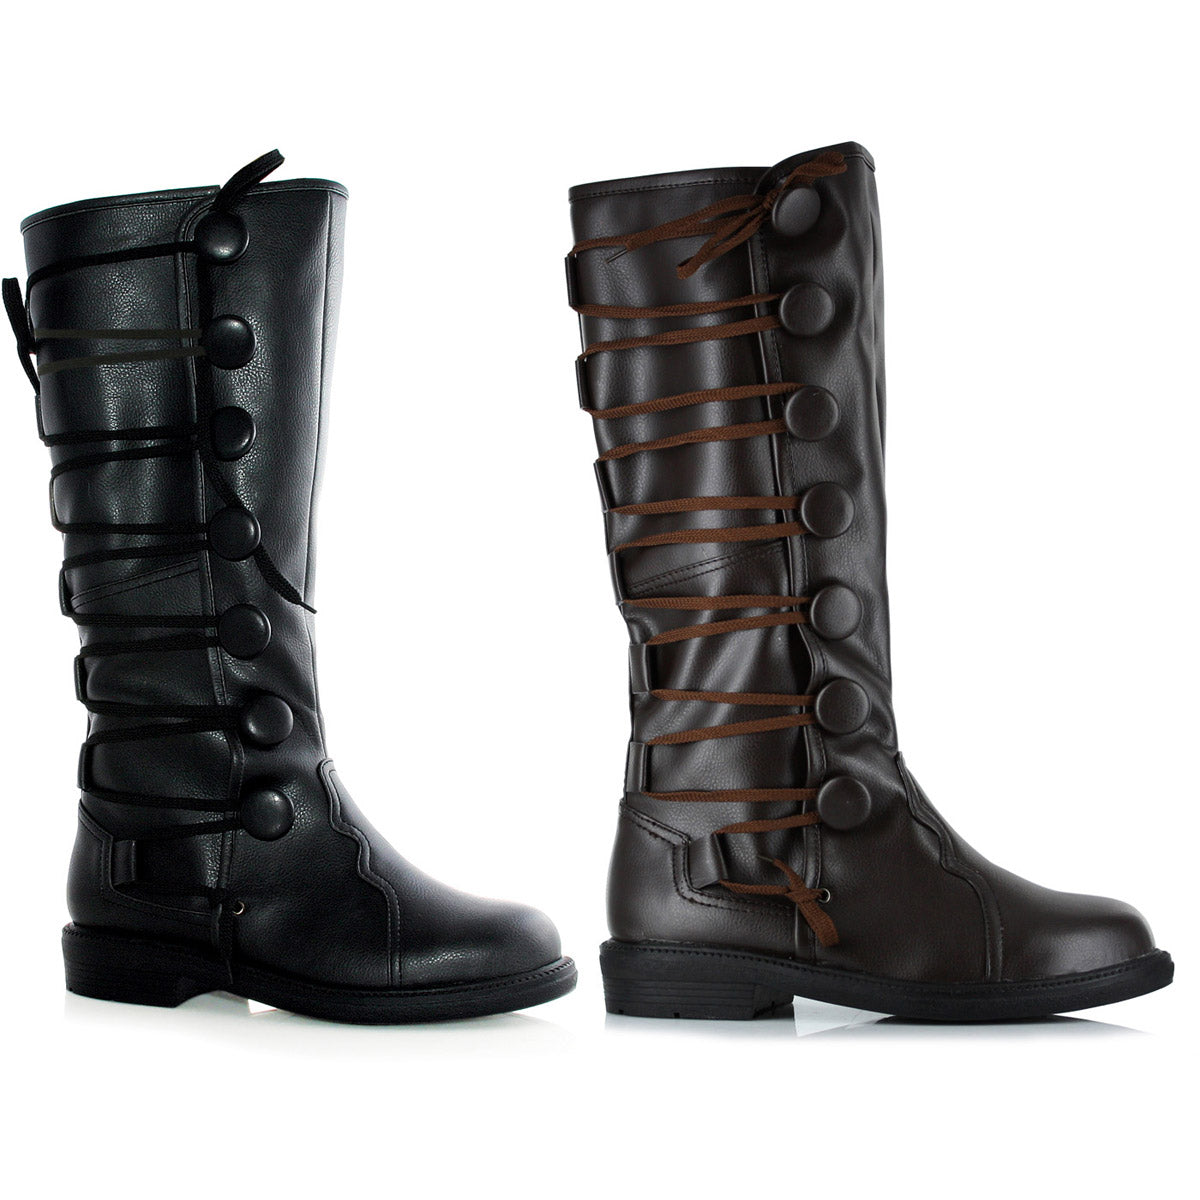 Full Lace Up Mid Calf Knee High Boots Ellie  125/REN